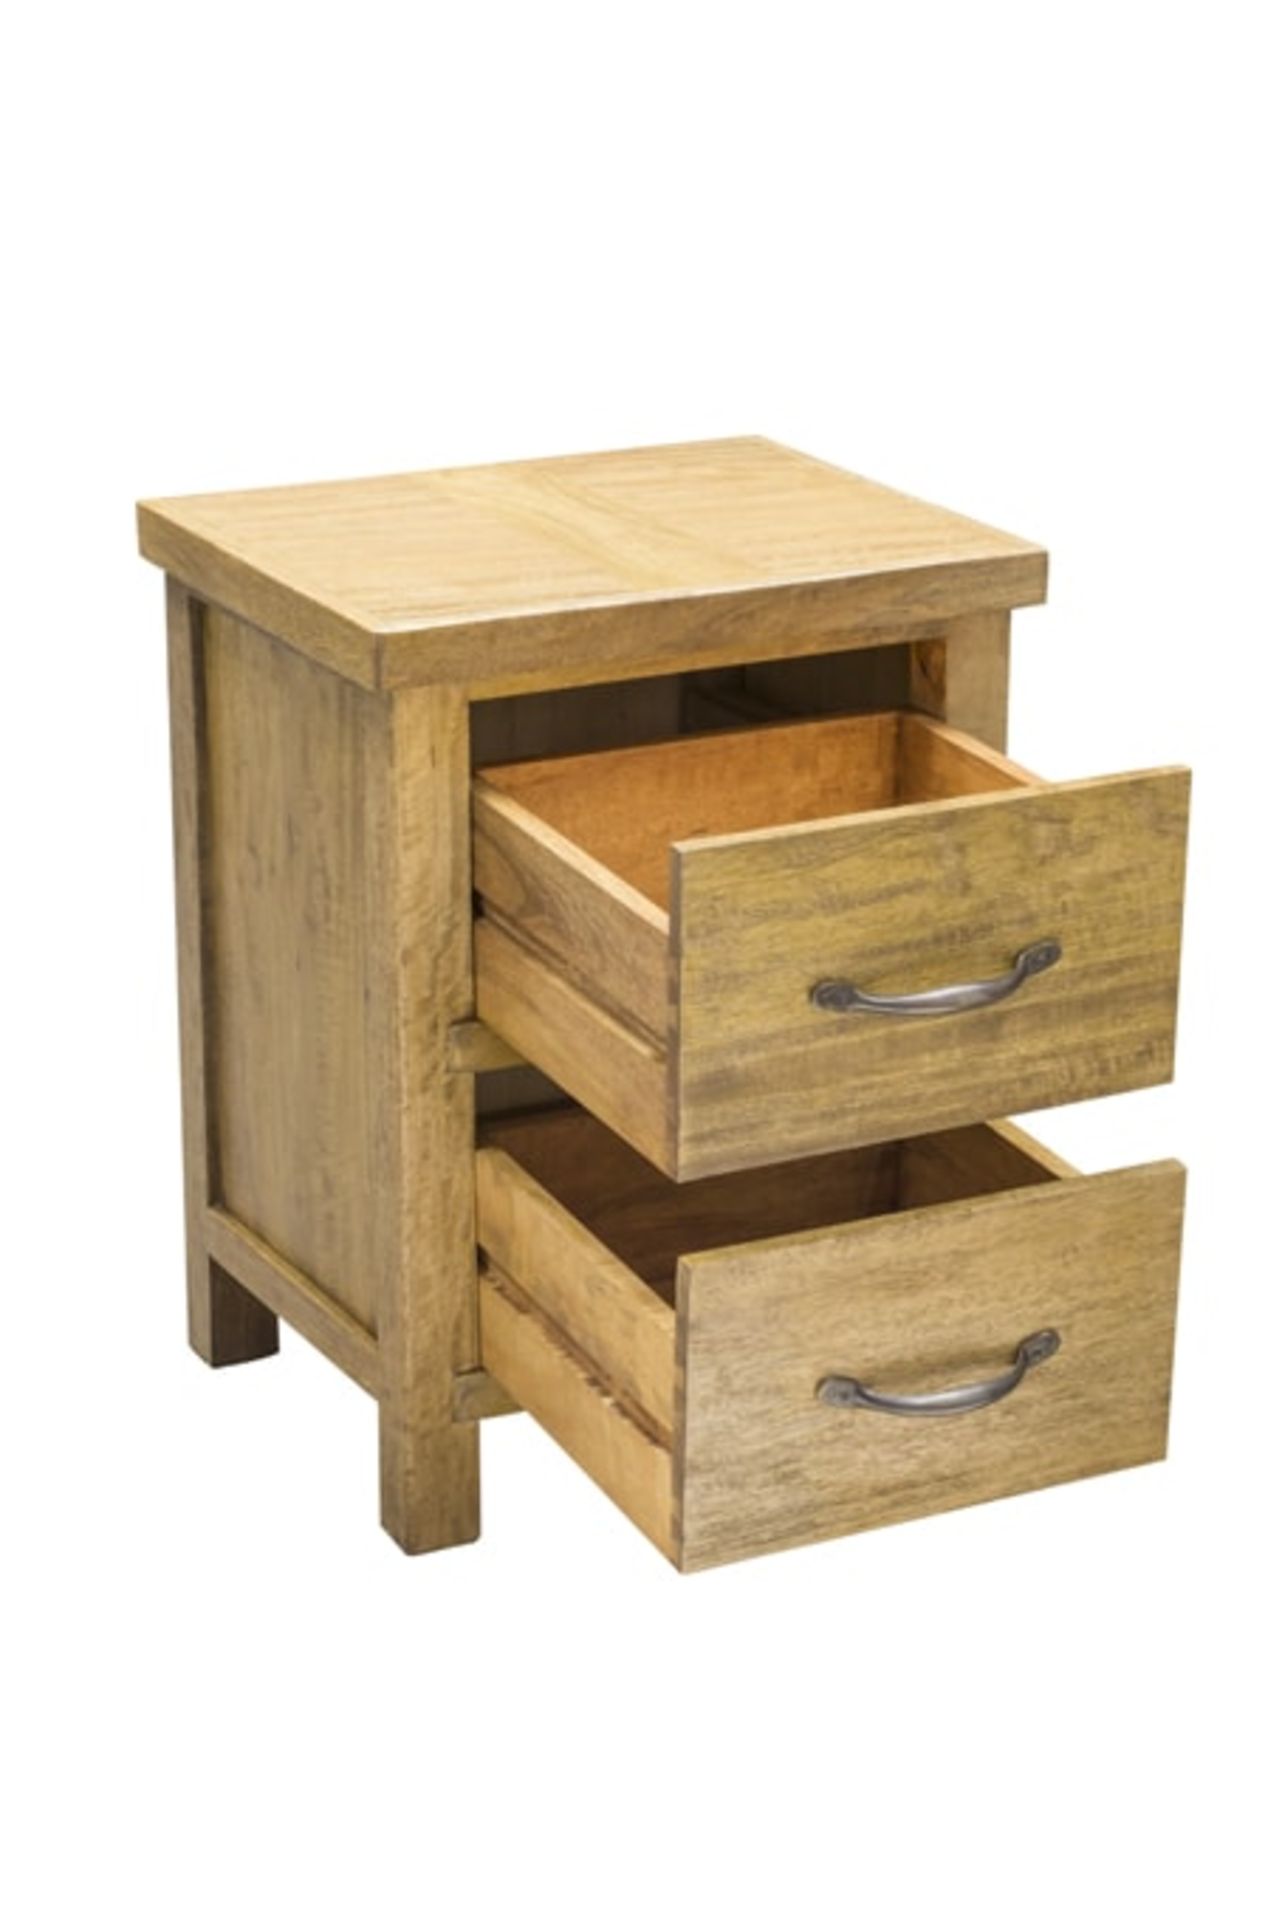 A Pair of Soho Solid Wood Bedside 2 Drawer Bedside Table will complement your bedroom scheme - Image 4 of 6